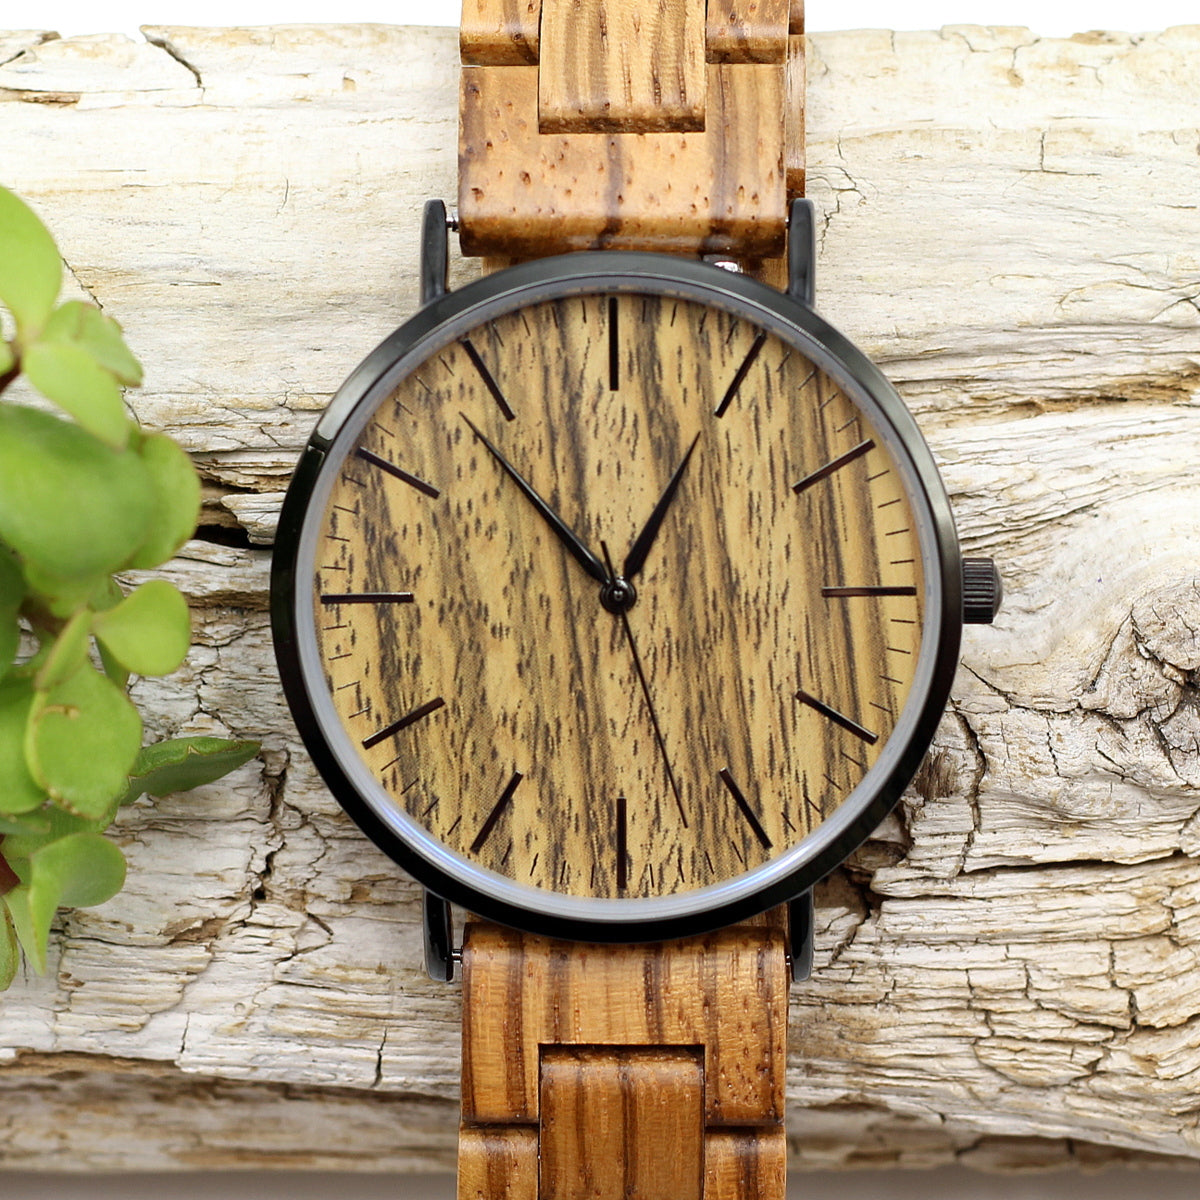 Men's modern stainless steel watch with zebra wood face and wooden strap. Thin, lightweight , eco-friendly and uber-trendy. Engrave a message on the back for R80. Shipping anywhere in SA for R59.